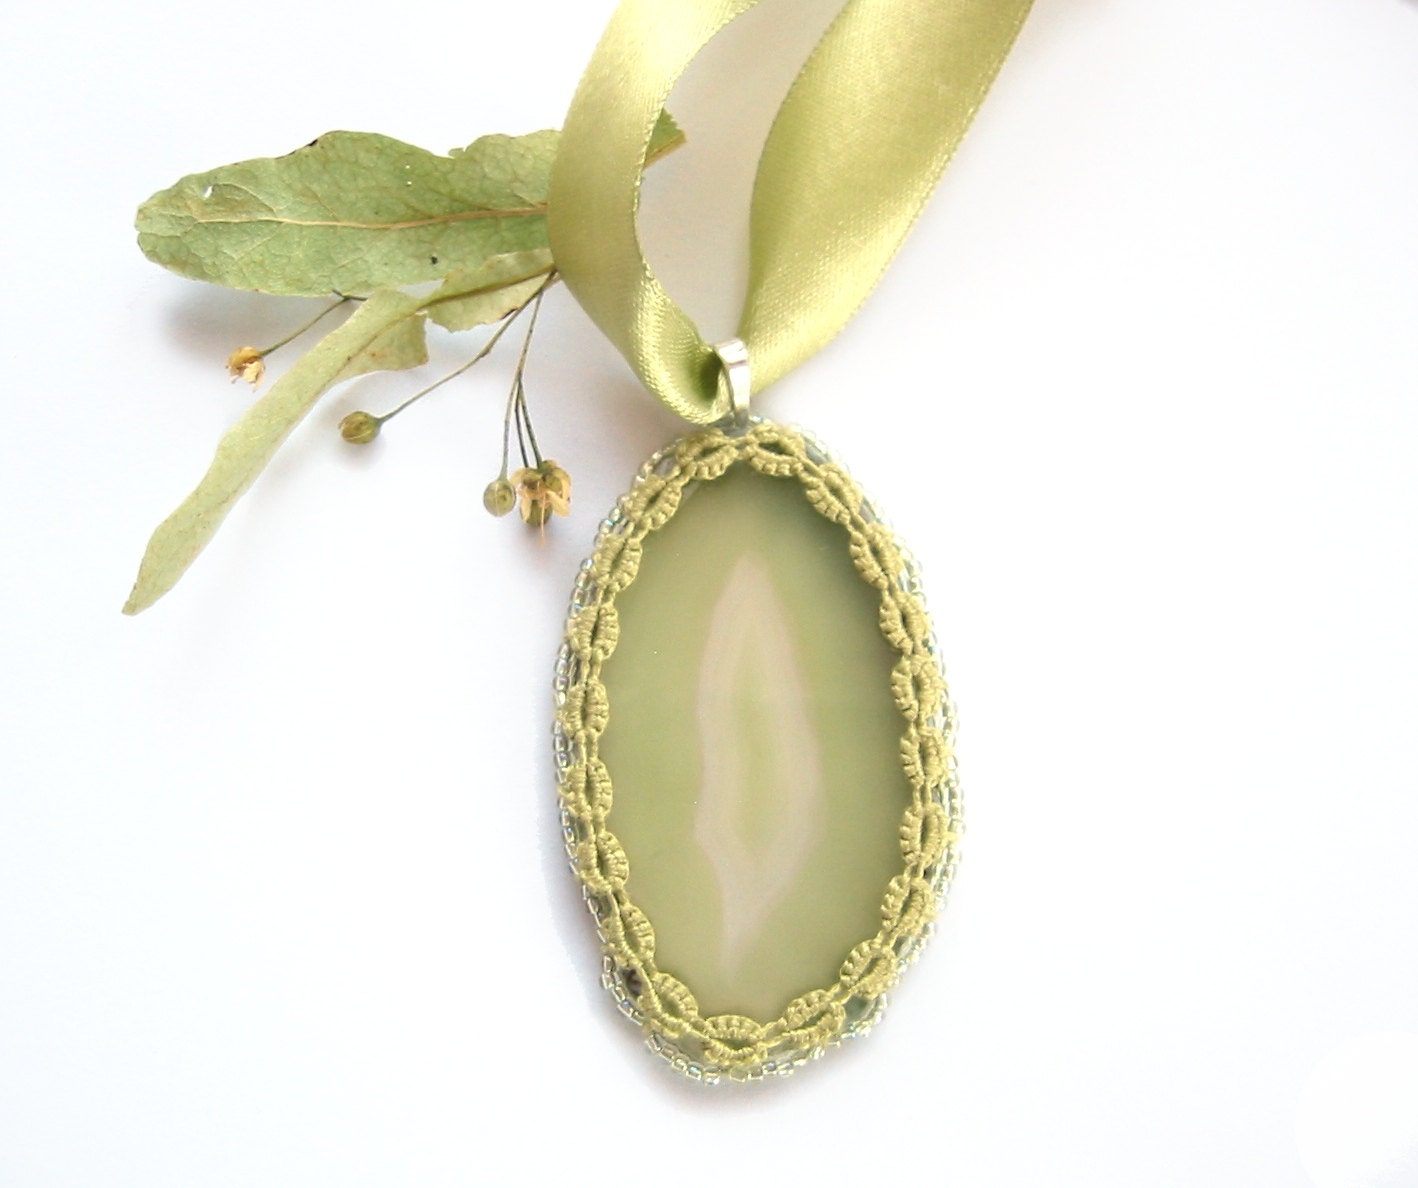 Agate slice pendant with tatted lace frame - Linden green agate stone unique pendant OOAK - LandOfLaces